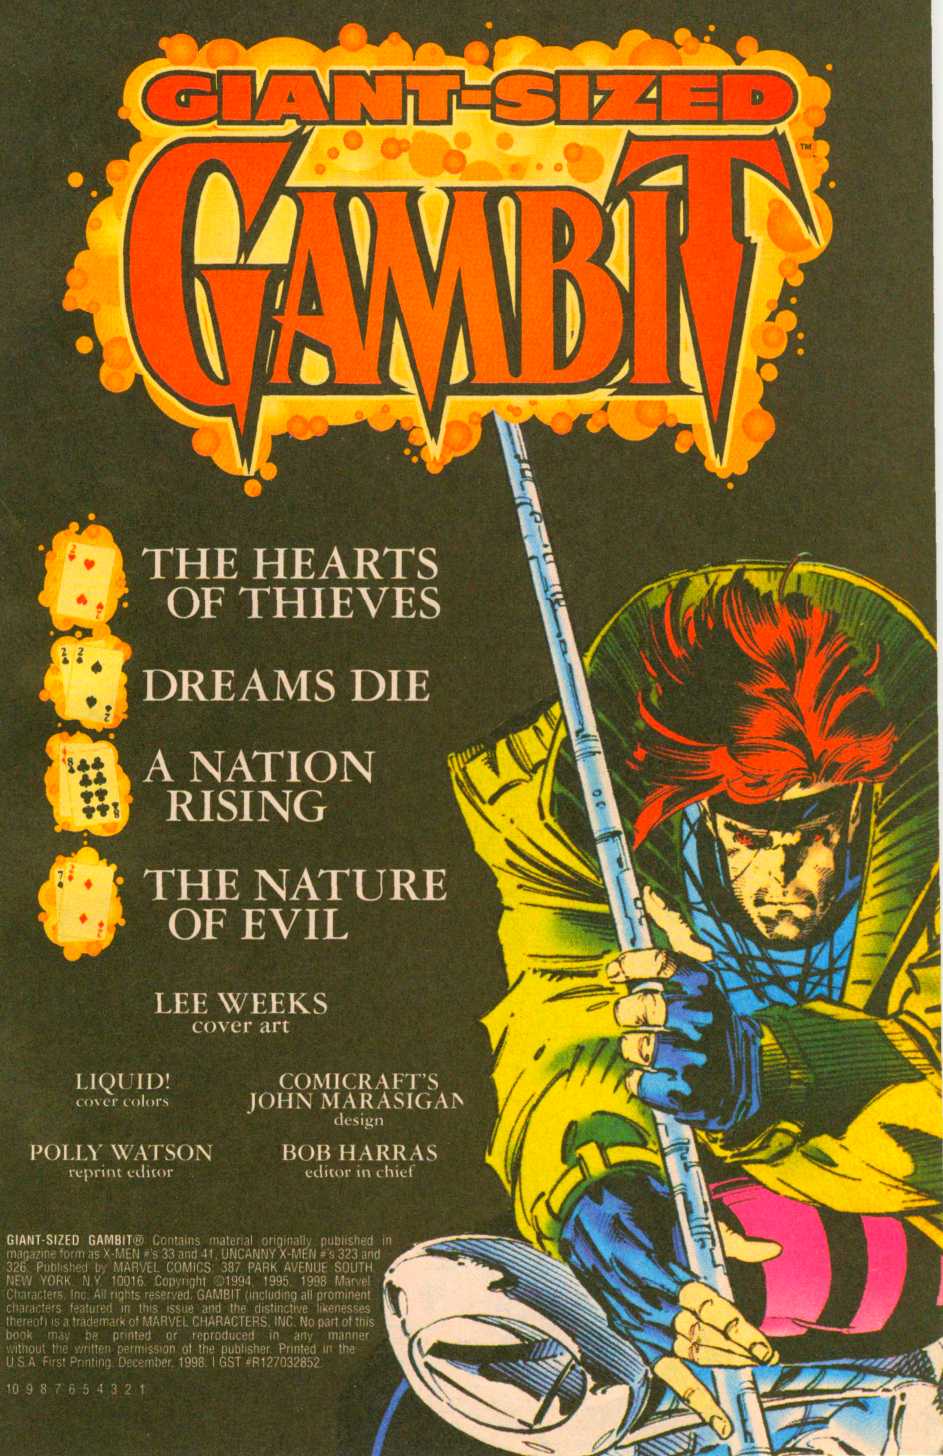 Read online Giant-Sized Gambit comic -  Issue # TPB - 2